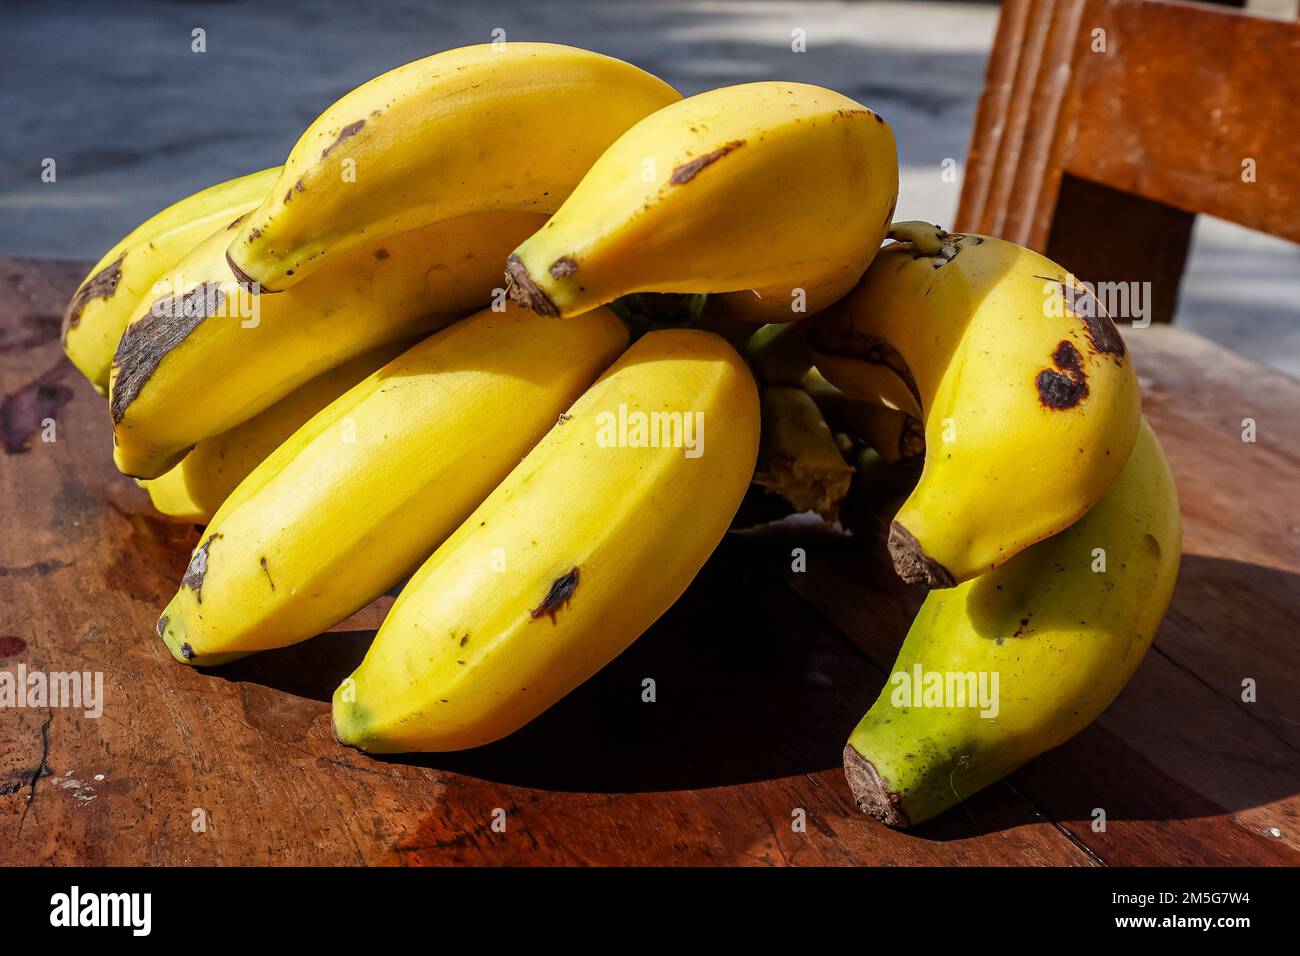 https://c8.alamy.com/comp/2M5G7W4/bunch-of-ripe-bananas-on-the-wooden-chair-2M5G7W4.jpg